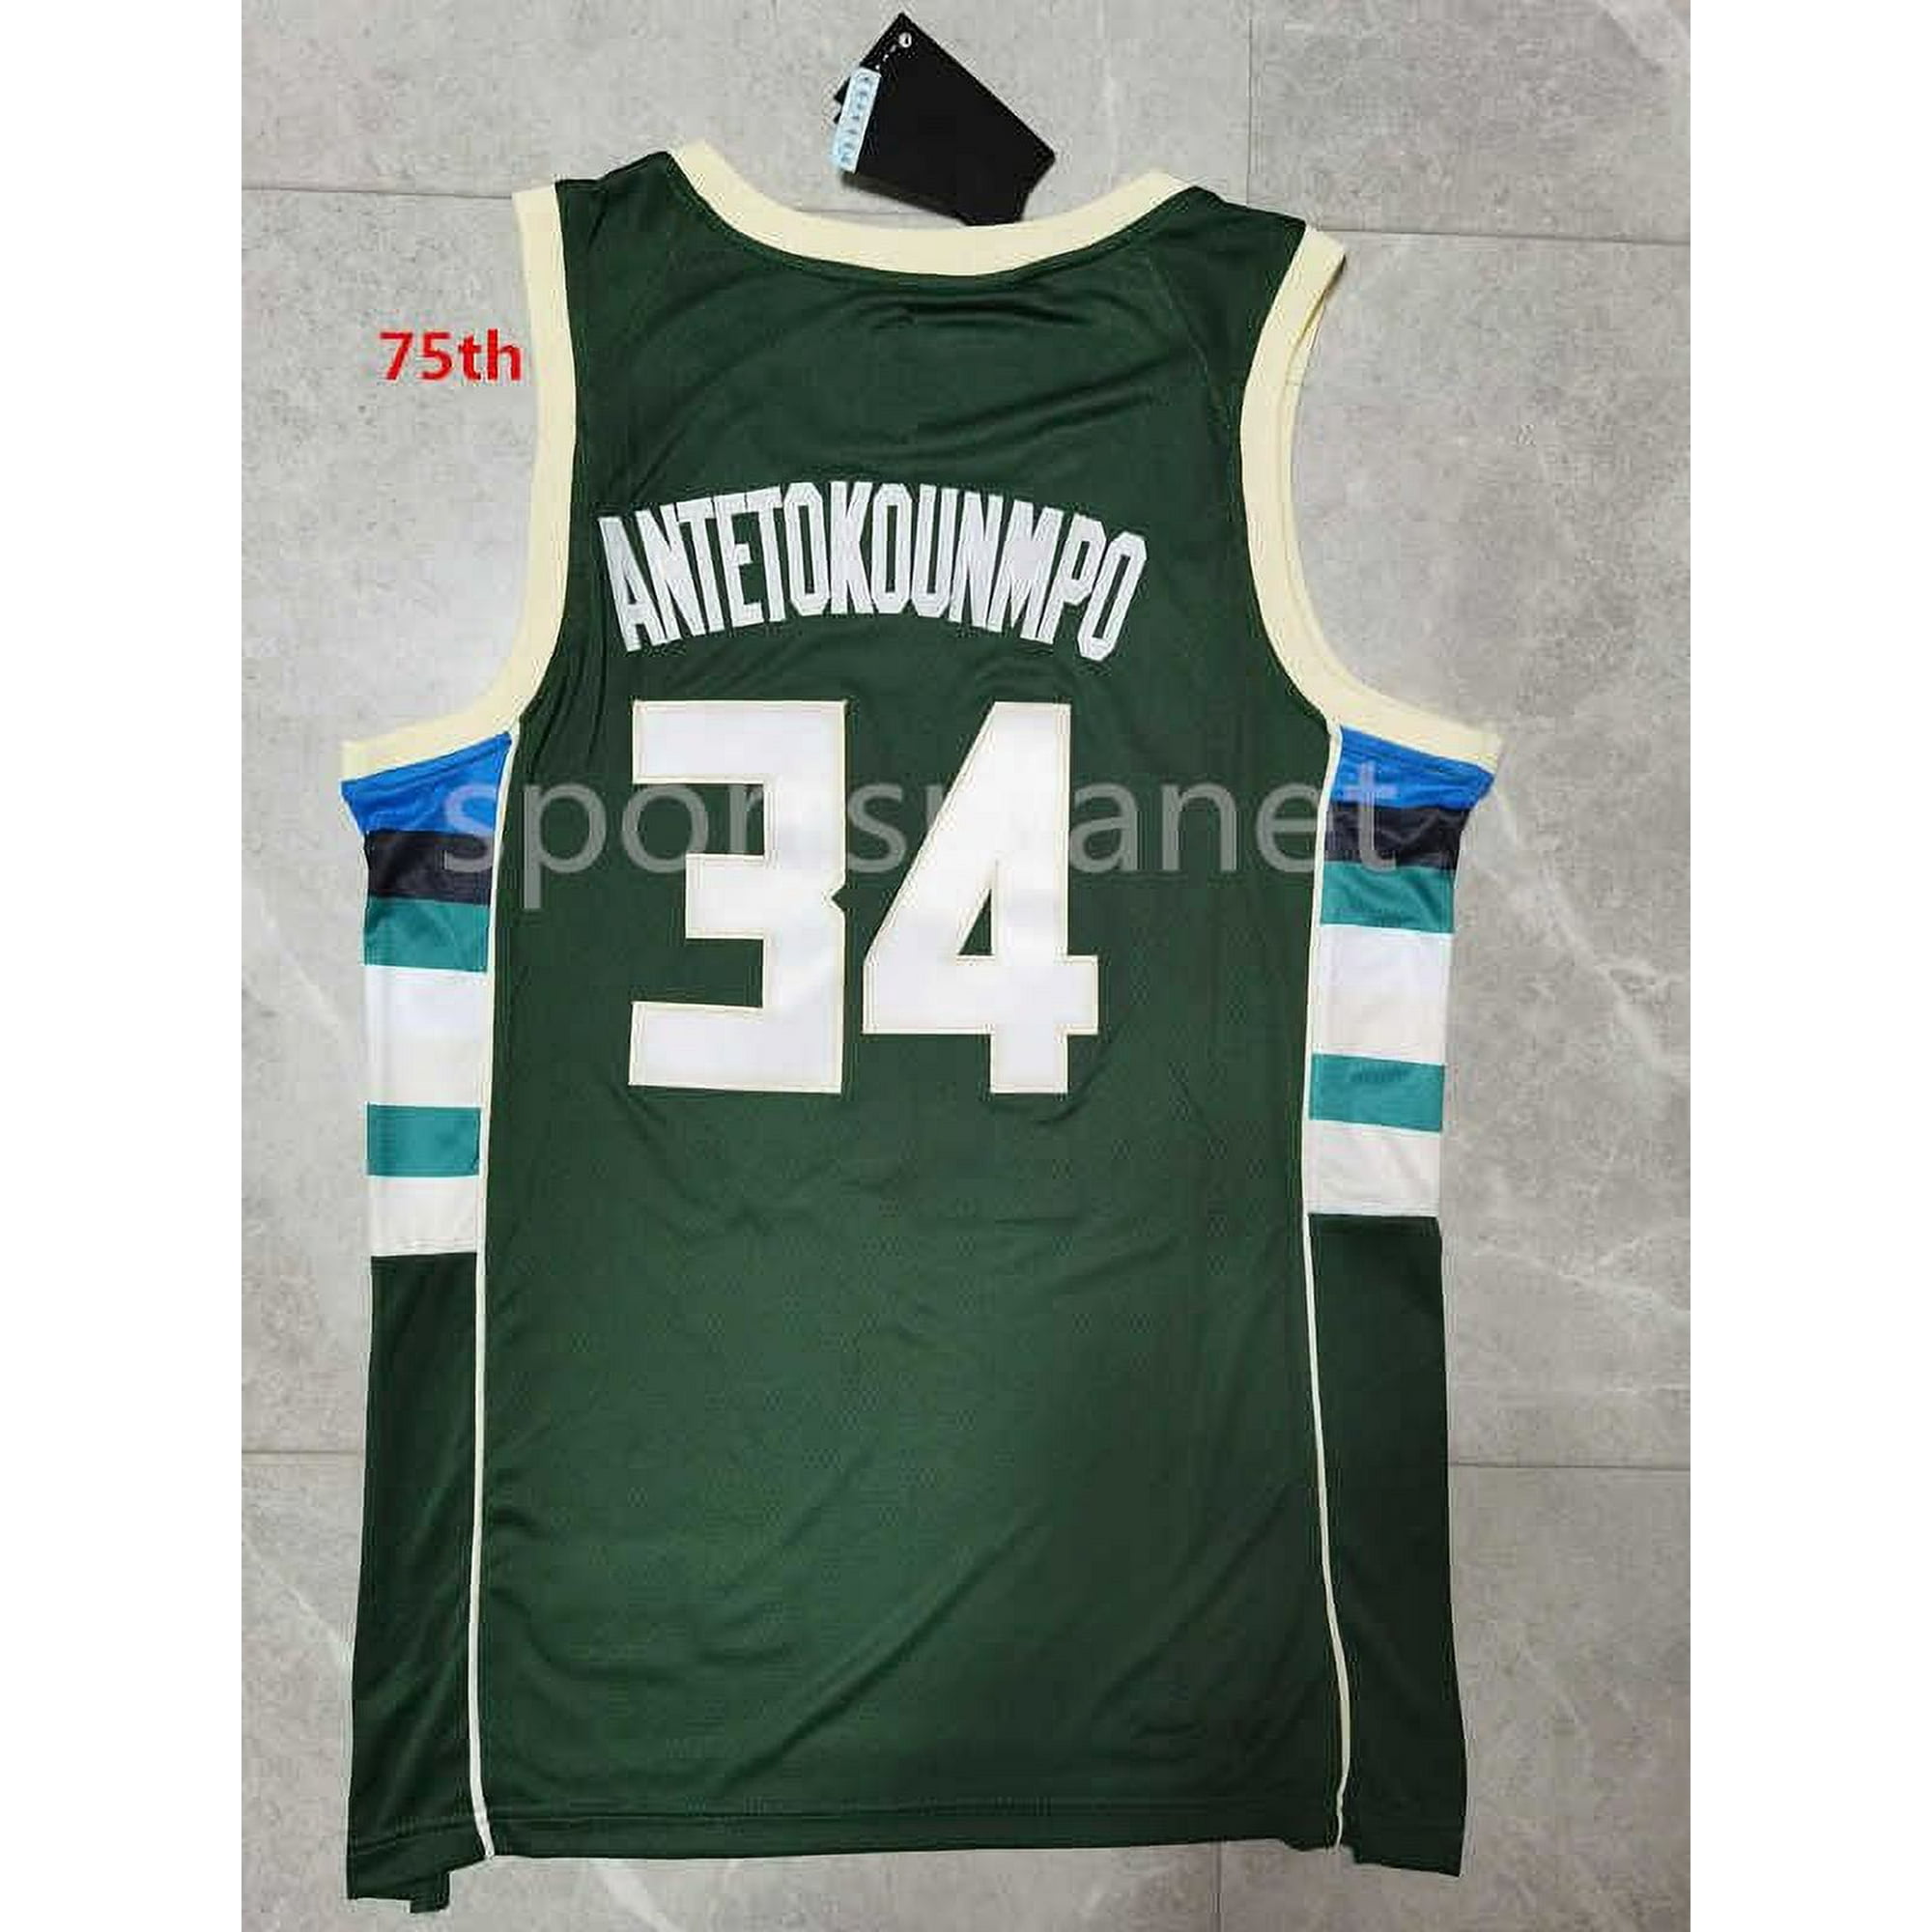 giannis city jersey